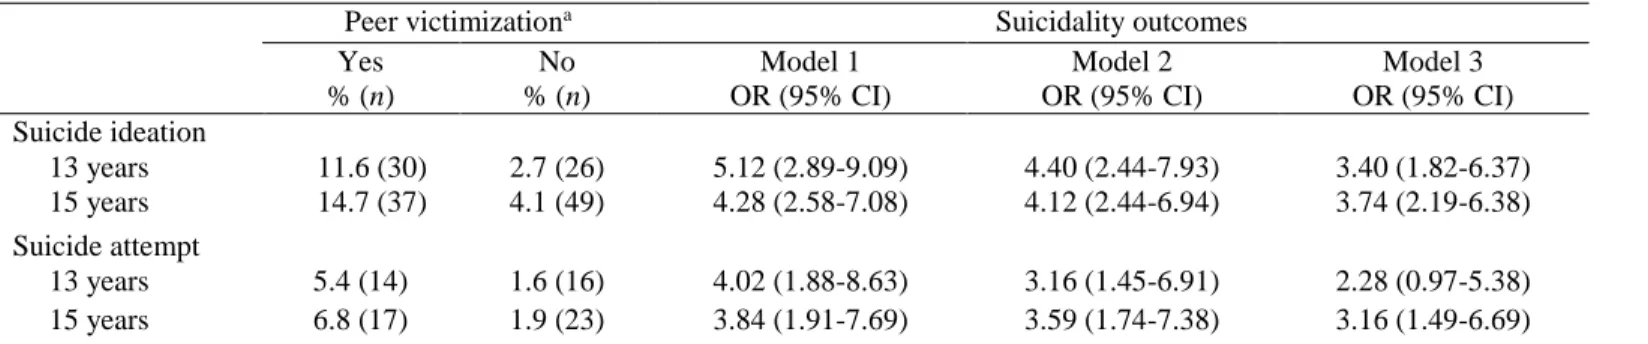 Table 2: Cross-Sectional Associations of Peer Victimization by Suicidality Outcomes (n=1,168)